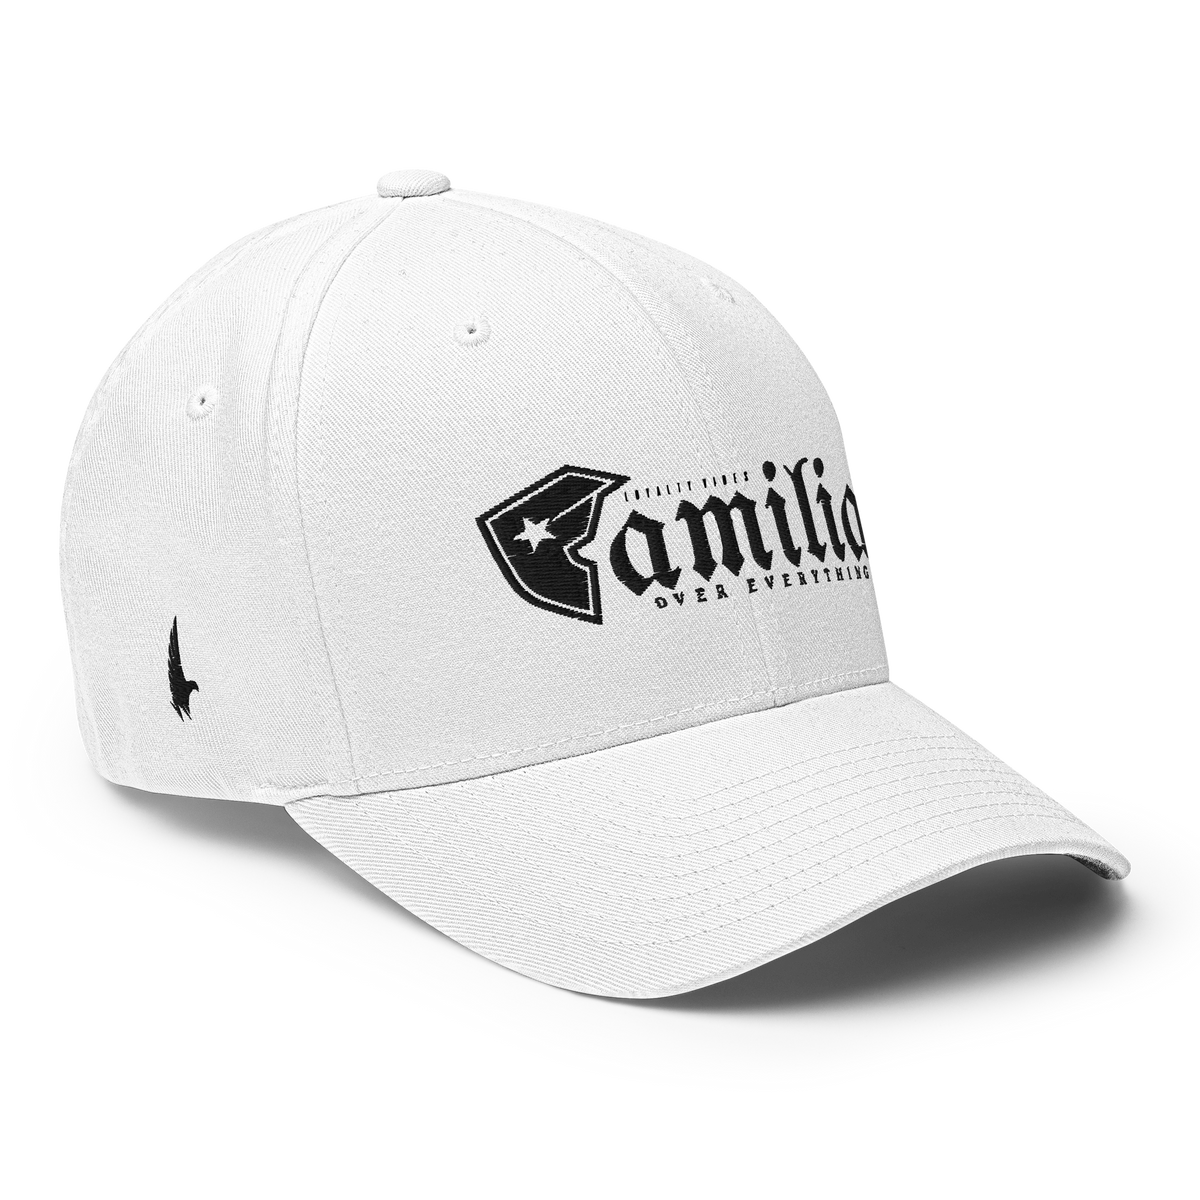 Familia Over Everything Fitted Hat White Fitted - Loyalty Vibes